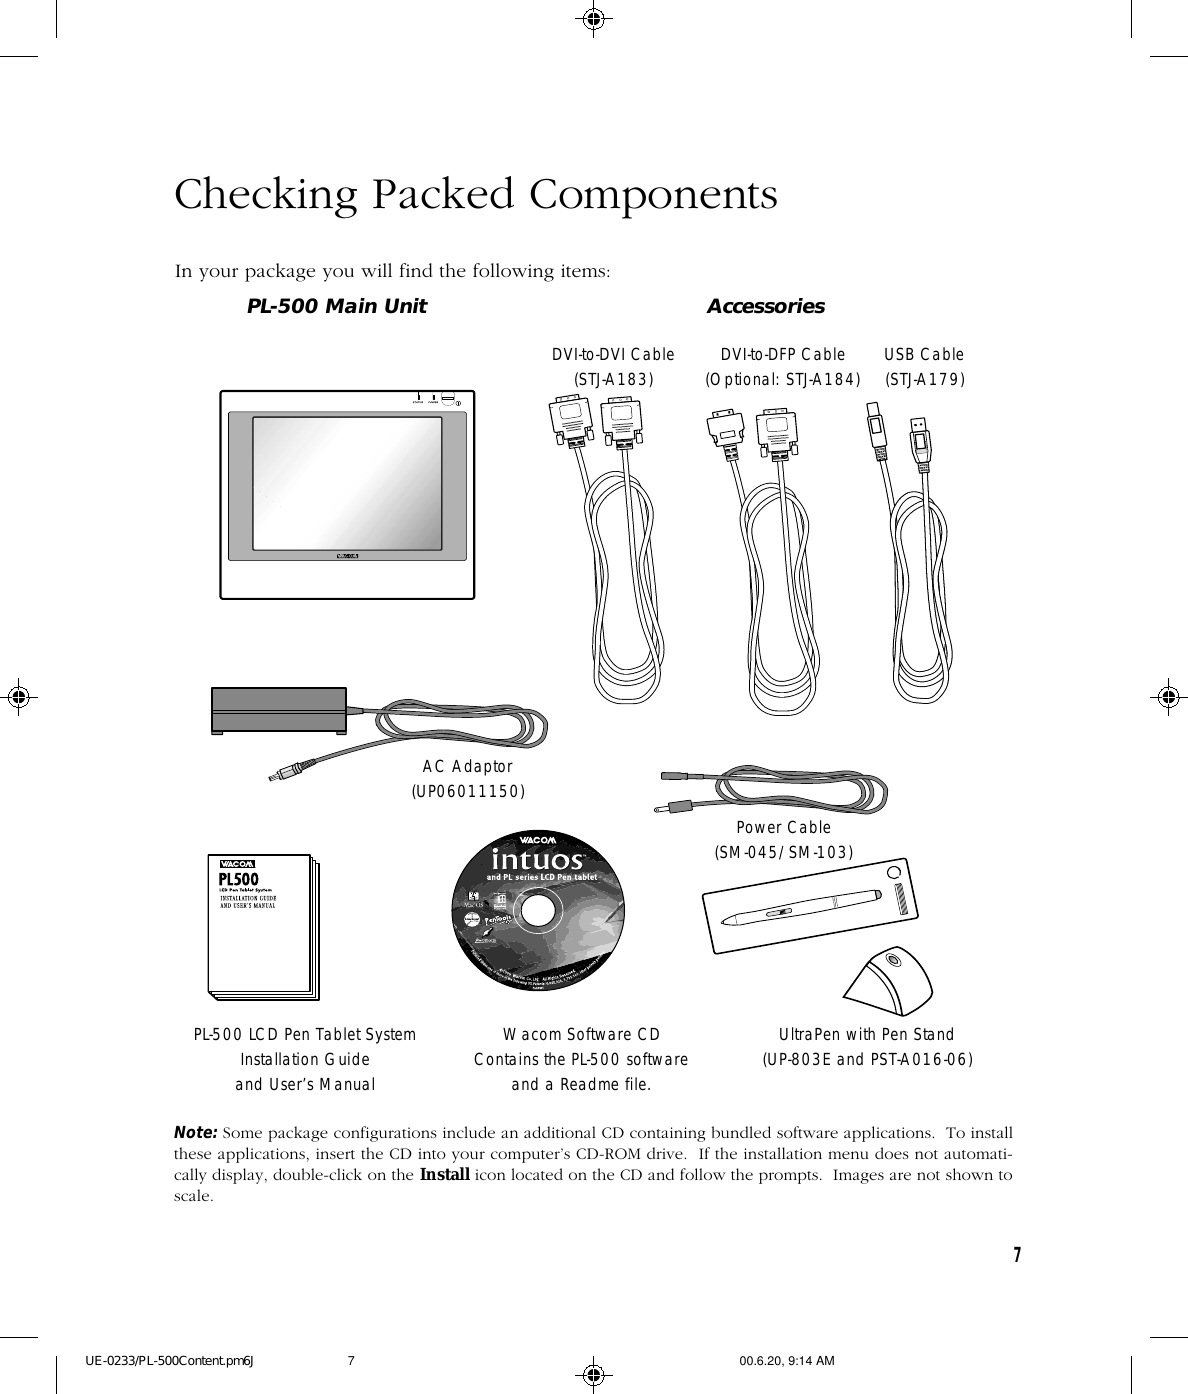 7Checking Packed ComponentsIn your package you will find the following items:AccessoriesNote: Some package configurations include an additional CD containing bundled software applications.  To installthese applications, insert the CD into your computer’s CD-ROM drive.  If the installation menu does not automati-cally display, double-click on the Install icon located on the CD and follow the prompts.  Images are not shown toscale.PL-500 Main UnitPower Cable(SM-045/SM-103)UltraPen with Pen Stand(UP-803E and PST-A016-06)USB Cable(STJ-A179)PL-500 LCD Pen Tablet SystemInstallation Guideand User’s ManualWacom Software CDContains the PL-500 softwareand a Readme file.DVI-to-DVI Cable(STJ-A183) DVI-to-DFP Cable(Optional: STJ-A184)AC Adaptor(UP06011150)UE-0233/PL-500Content.pm6J 00.6.20, 9:14 AM7